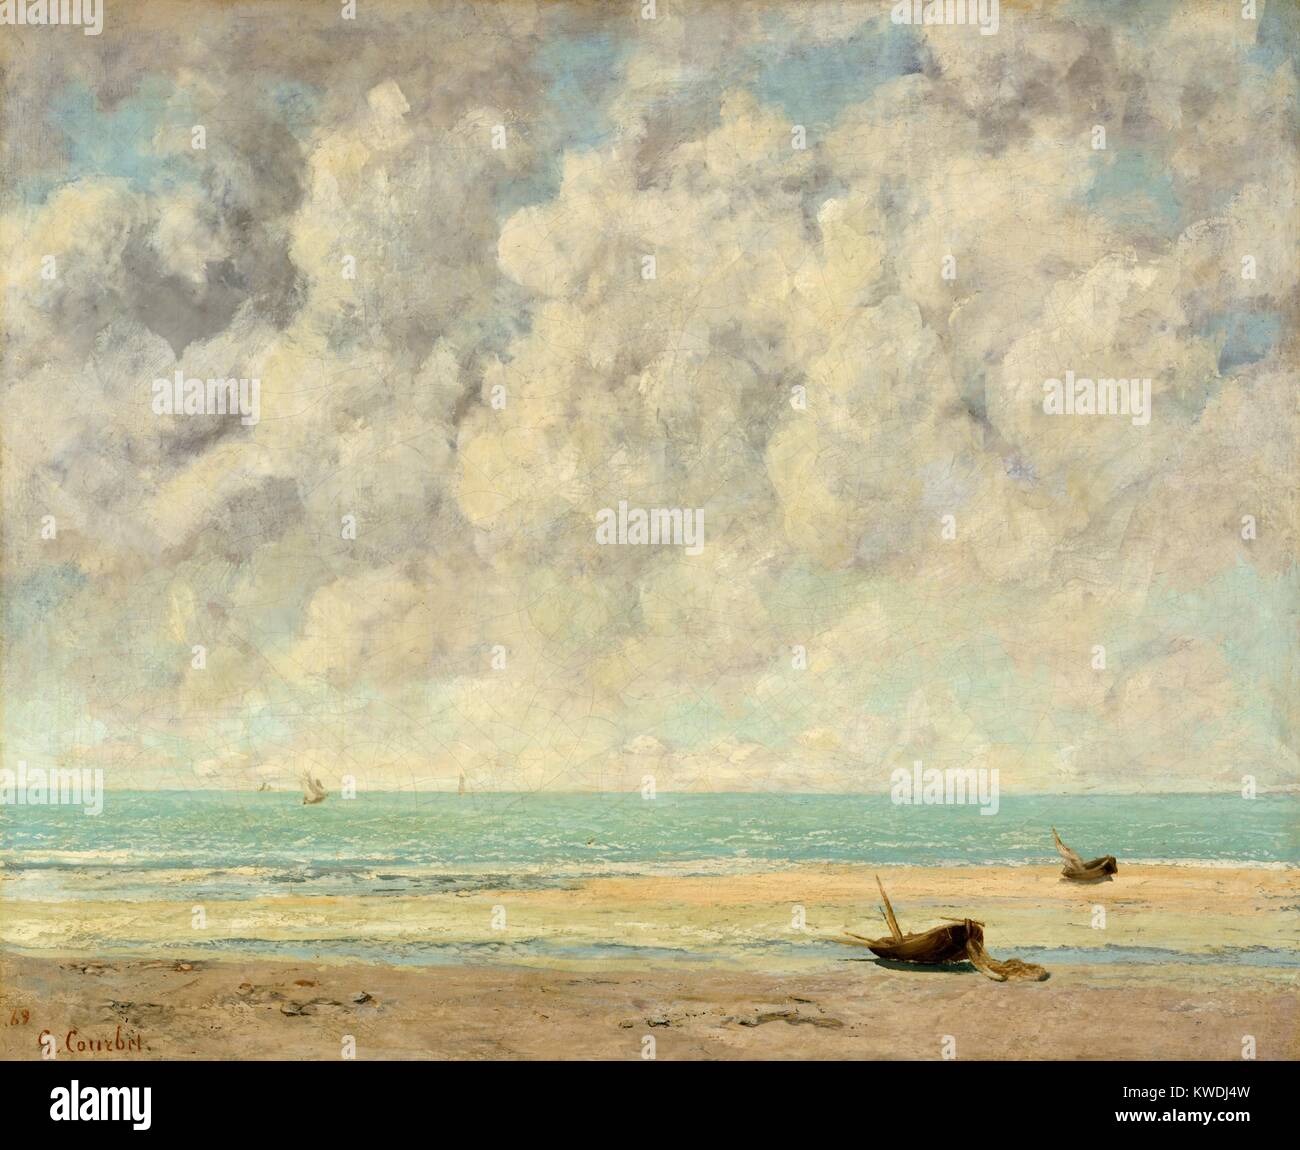 THE CALM SEA, by Gustave Courbet, 1869, French painting, oil on canvas. The English Channel at Etretat, Normandy in August 1869. By this time Courbet was appreciative of the work of Impressionists Manet and Monet, which may have influenced his lighter more luminous palette (BSLOC 2017 9 122) Stock Photo